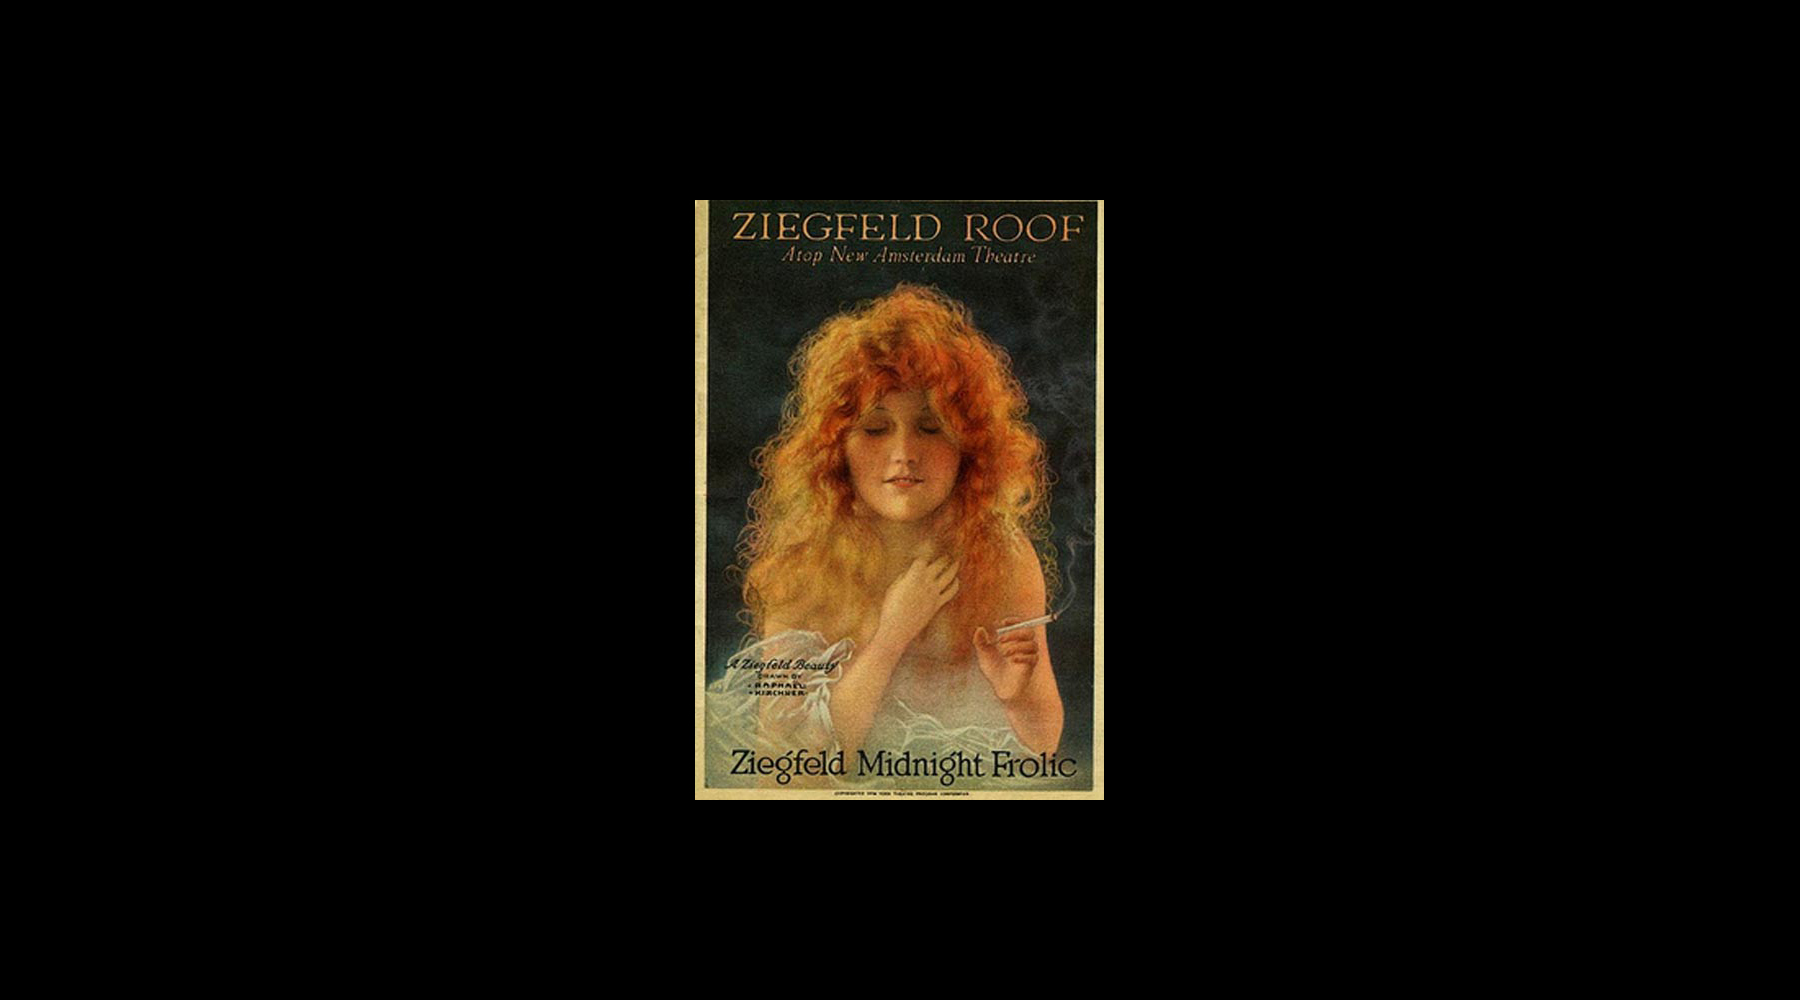 Olive joined Florenz Ziegfeld's Midnight Frolic in 1916 and began an affair with him.